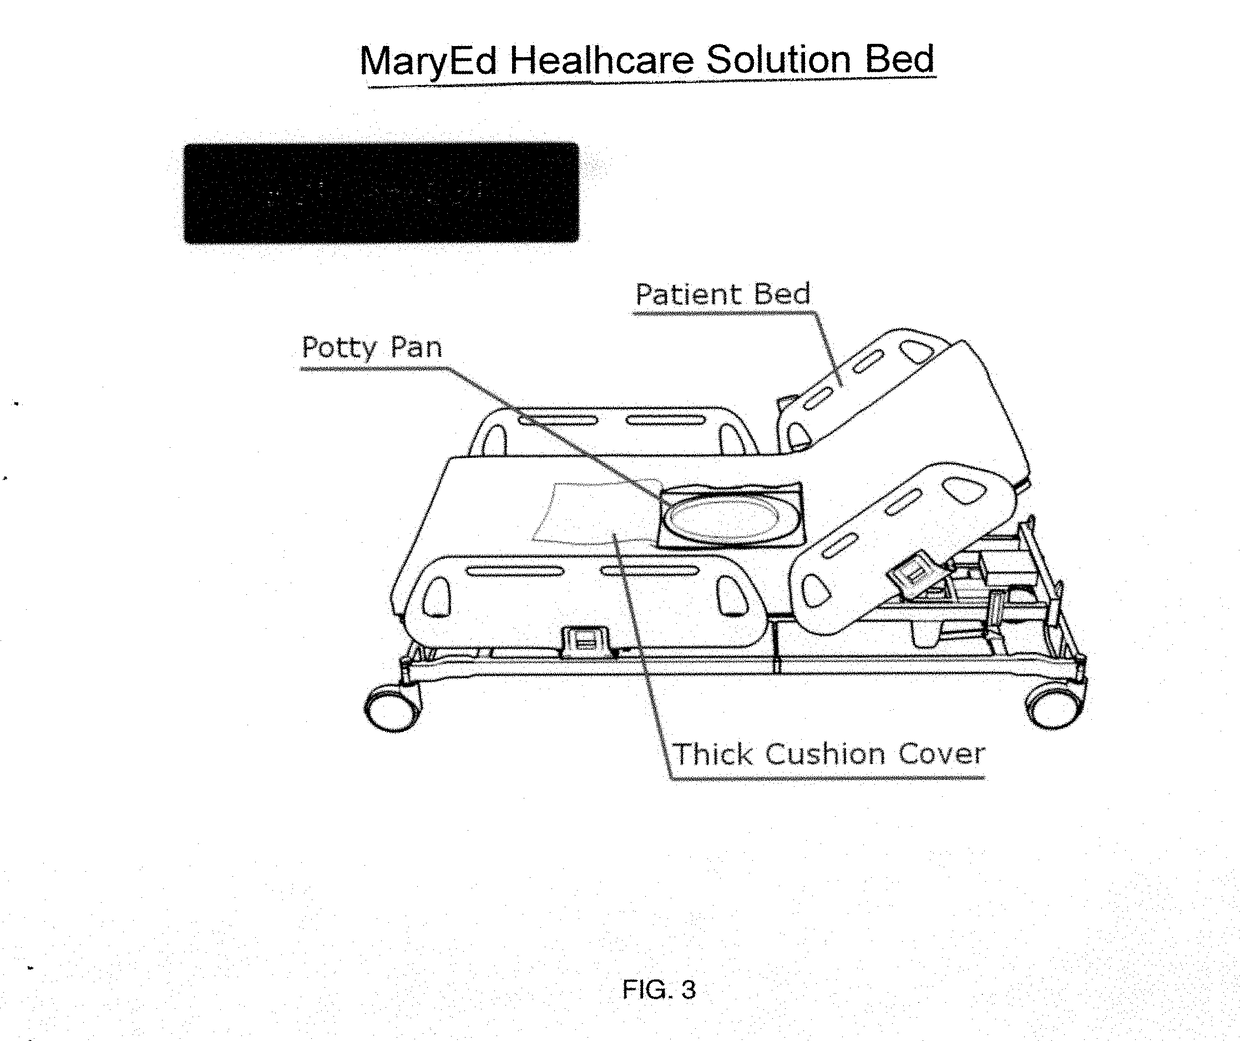 Maryed healthcare solution bed